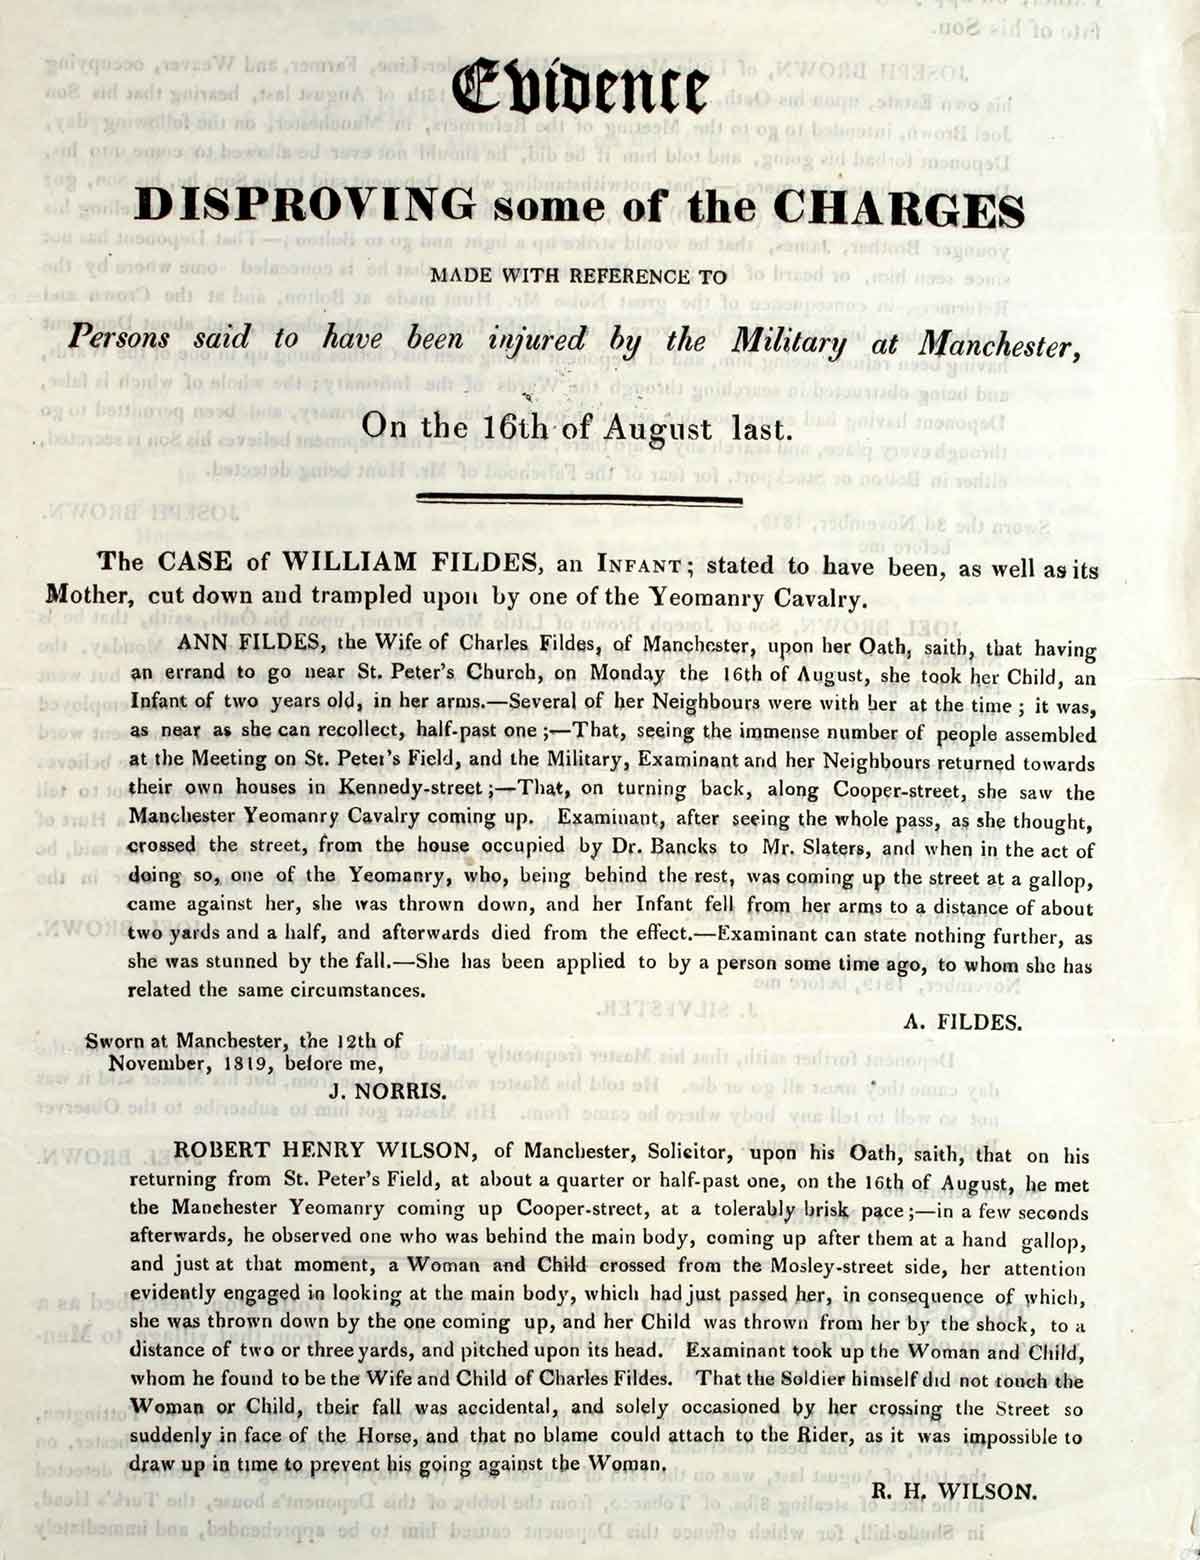 A printed document titled 'Evidence disproving some of the charges'